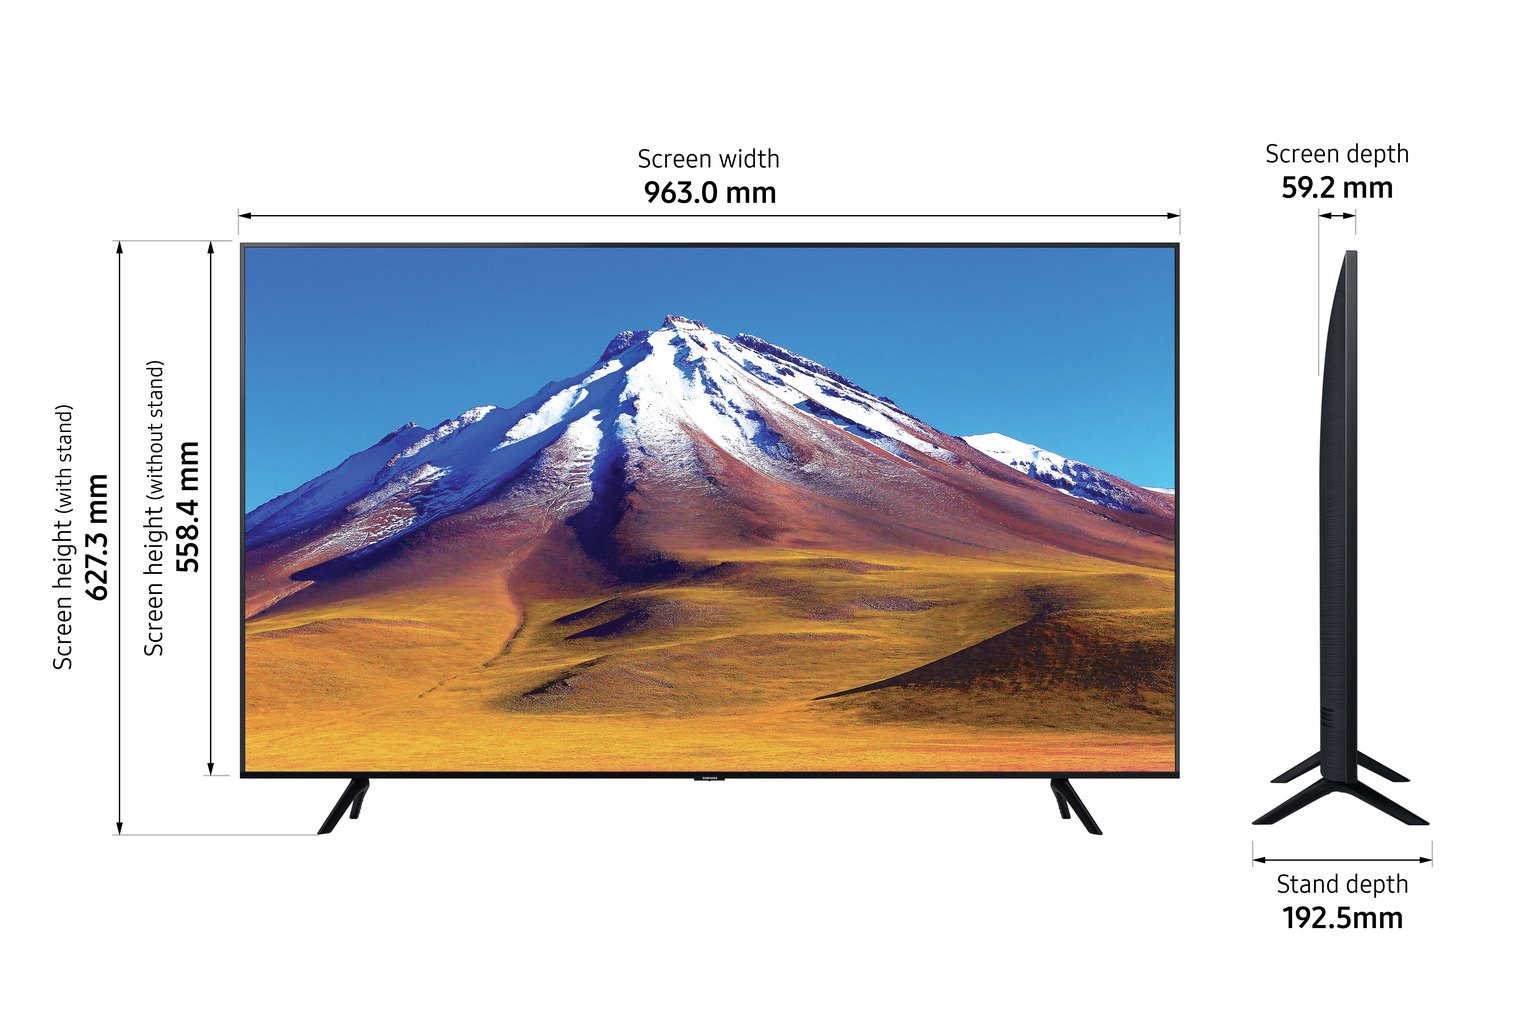 Samsung 43 Inch UE43TU7020KXXU Smart 4K UHD TV with HDR Review